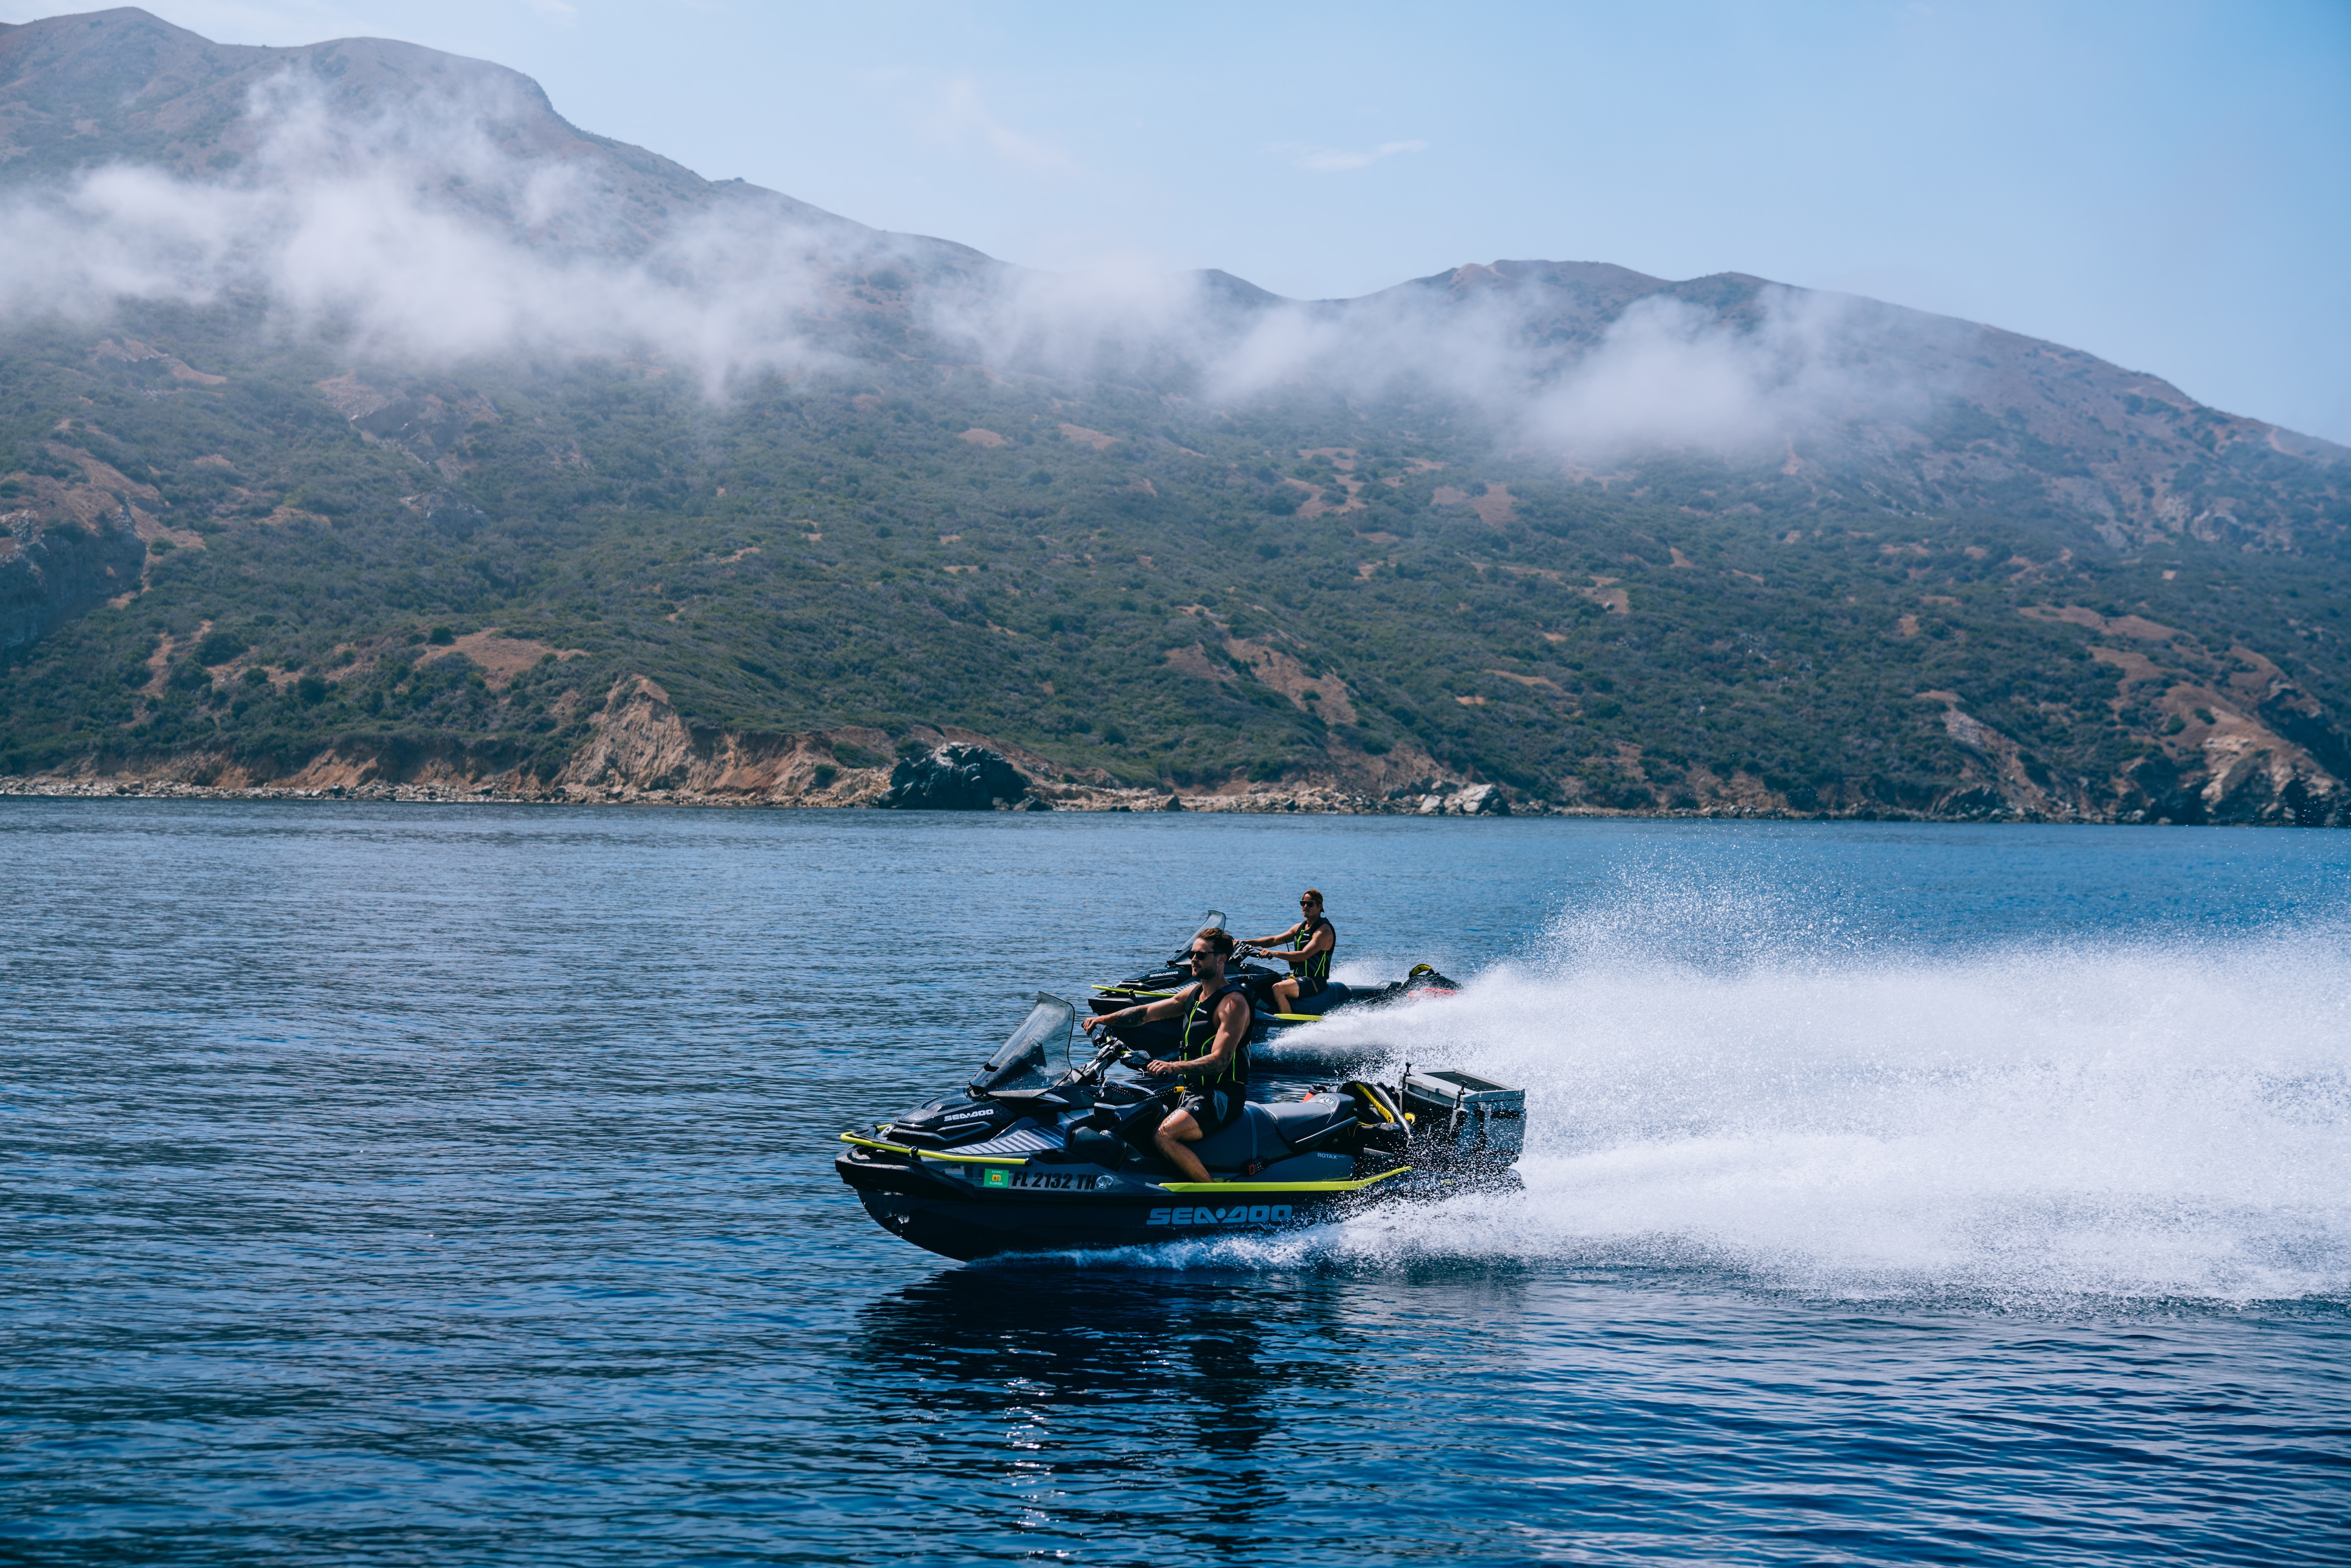 Dylan Efron riding his personal watercraft Sea-Doo Explorer Pro 170 in Catalina Island